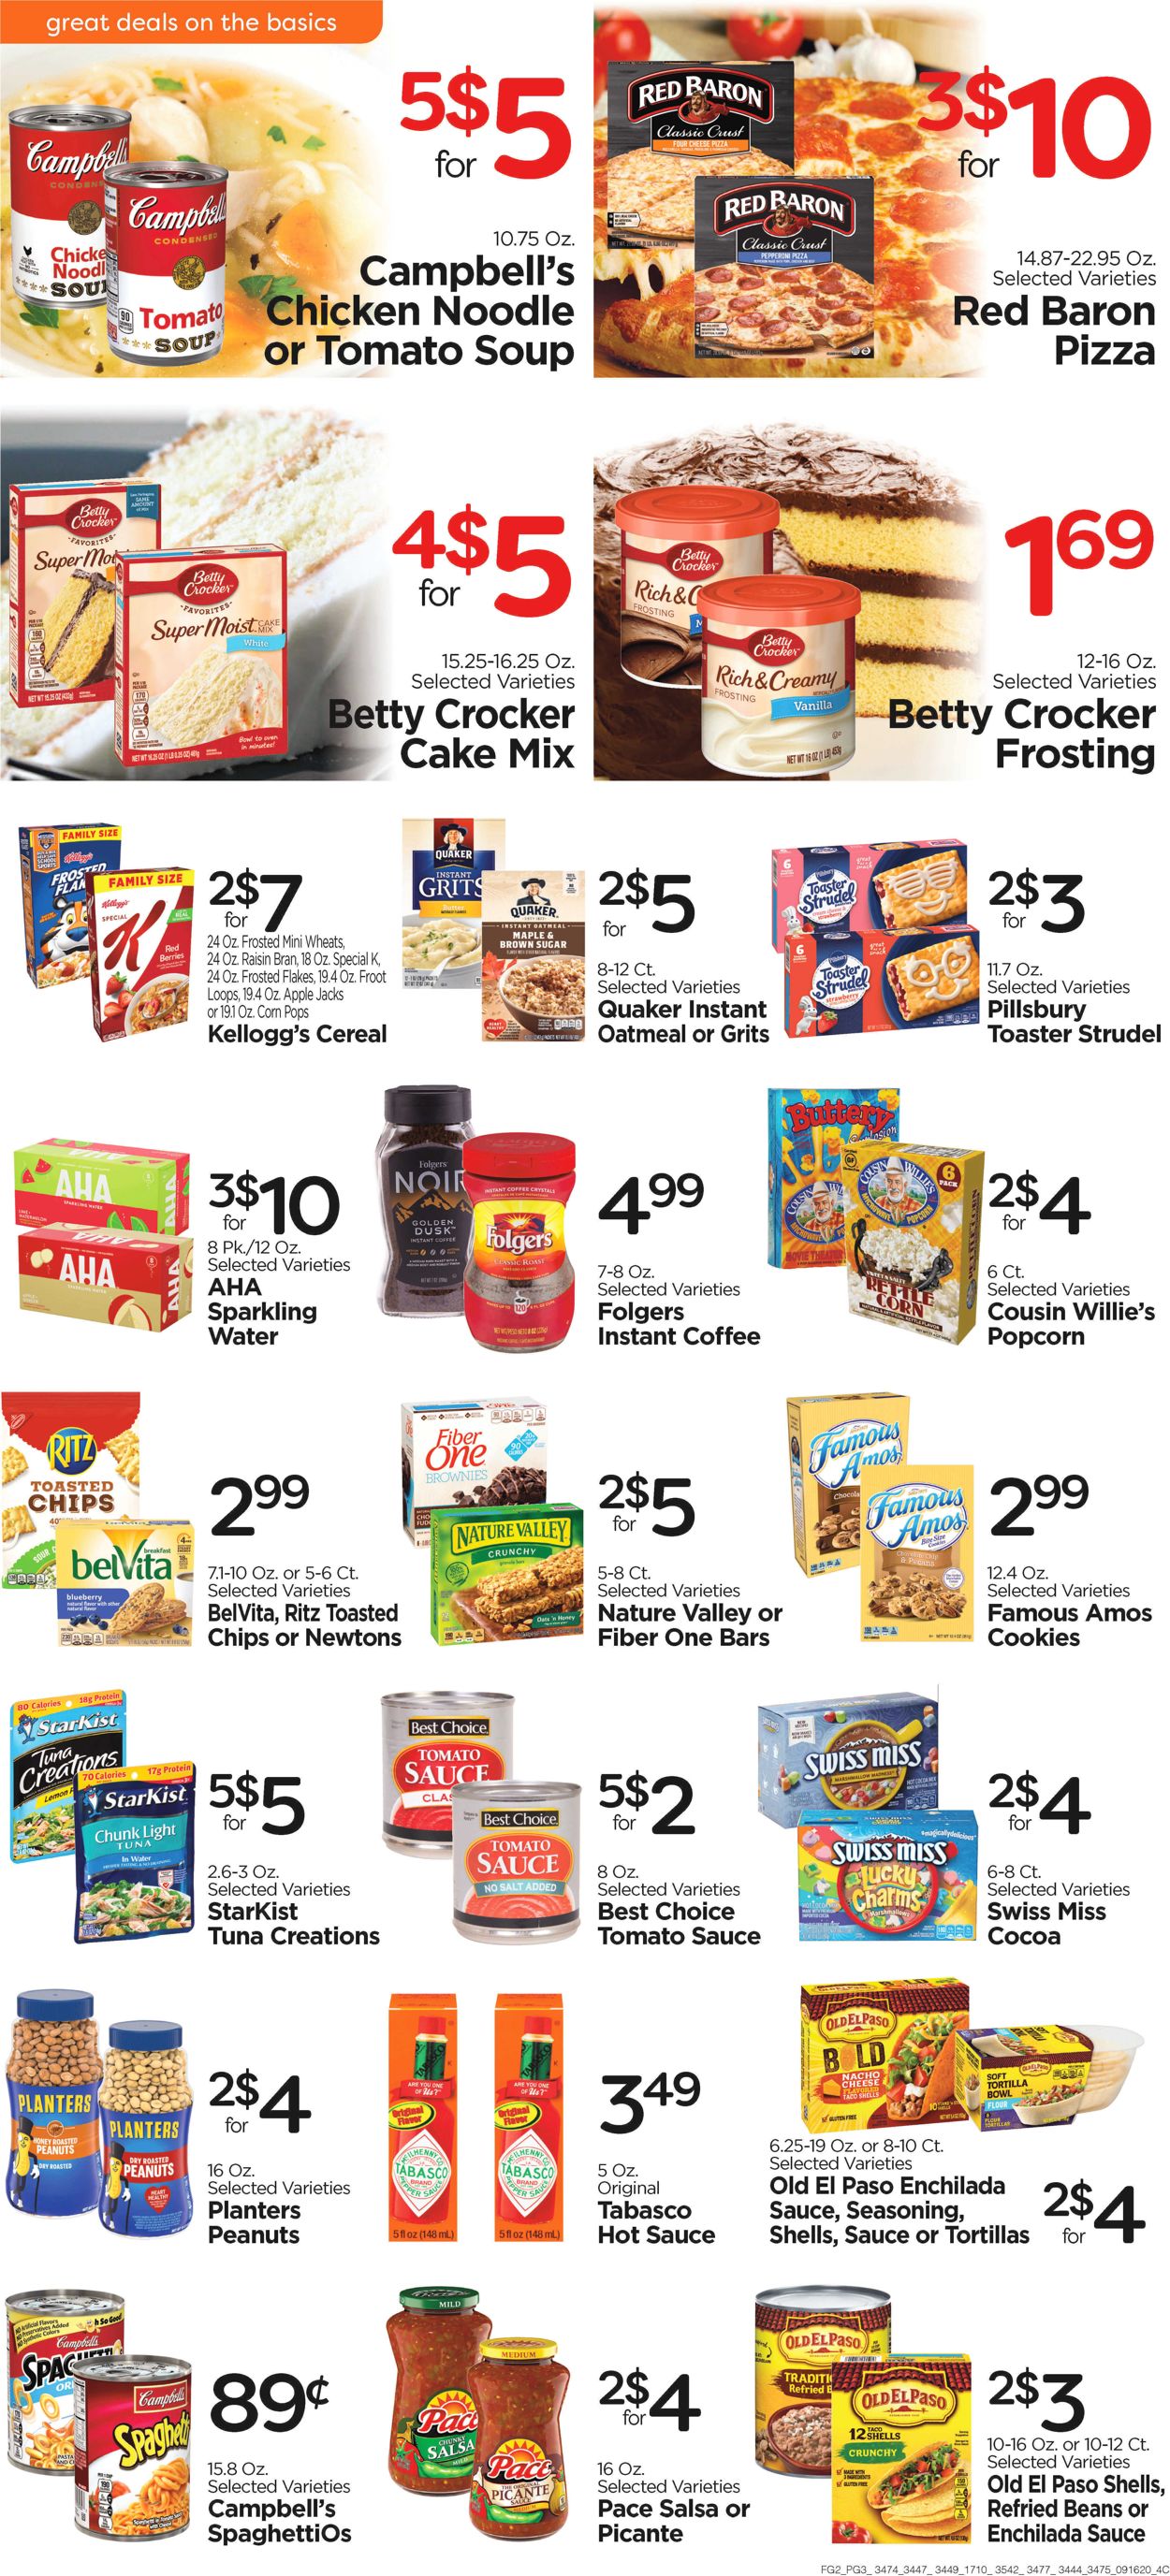 Catalogue Edwards Food Giant from 09/16/2020